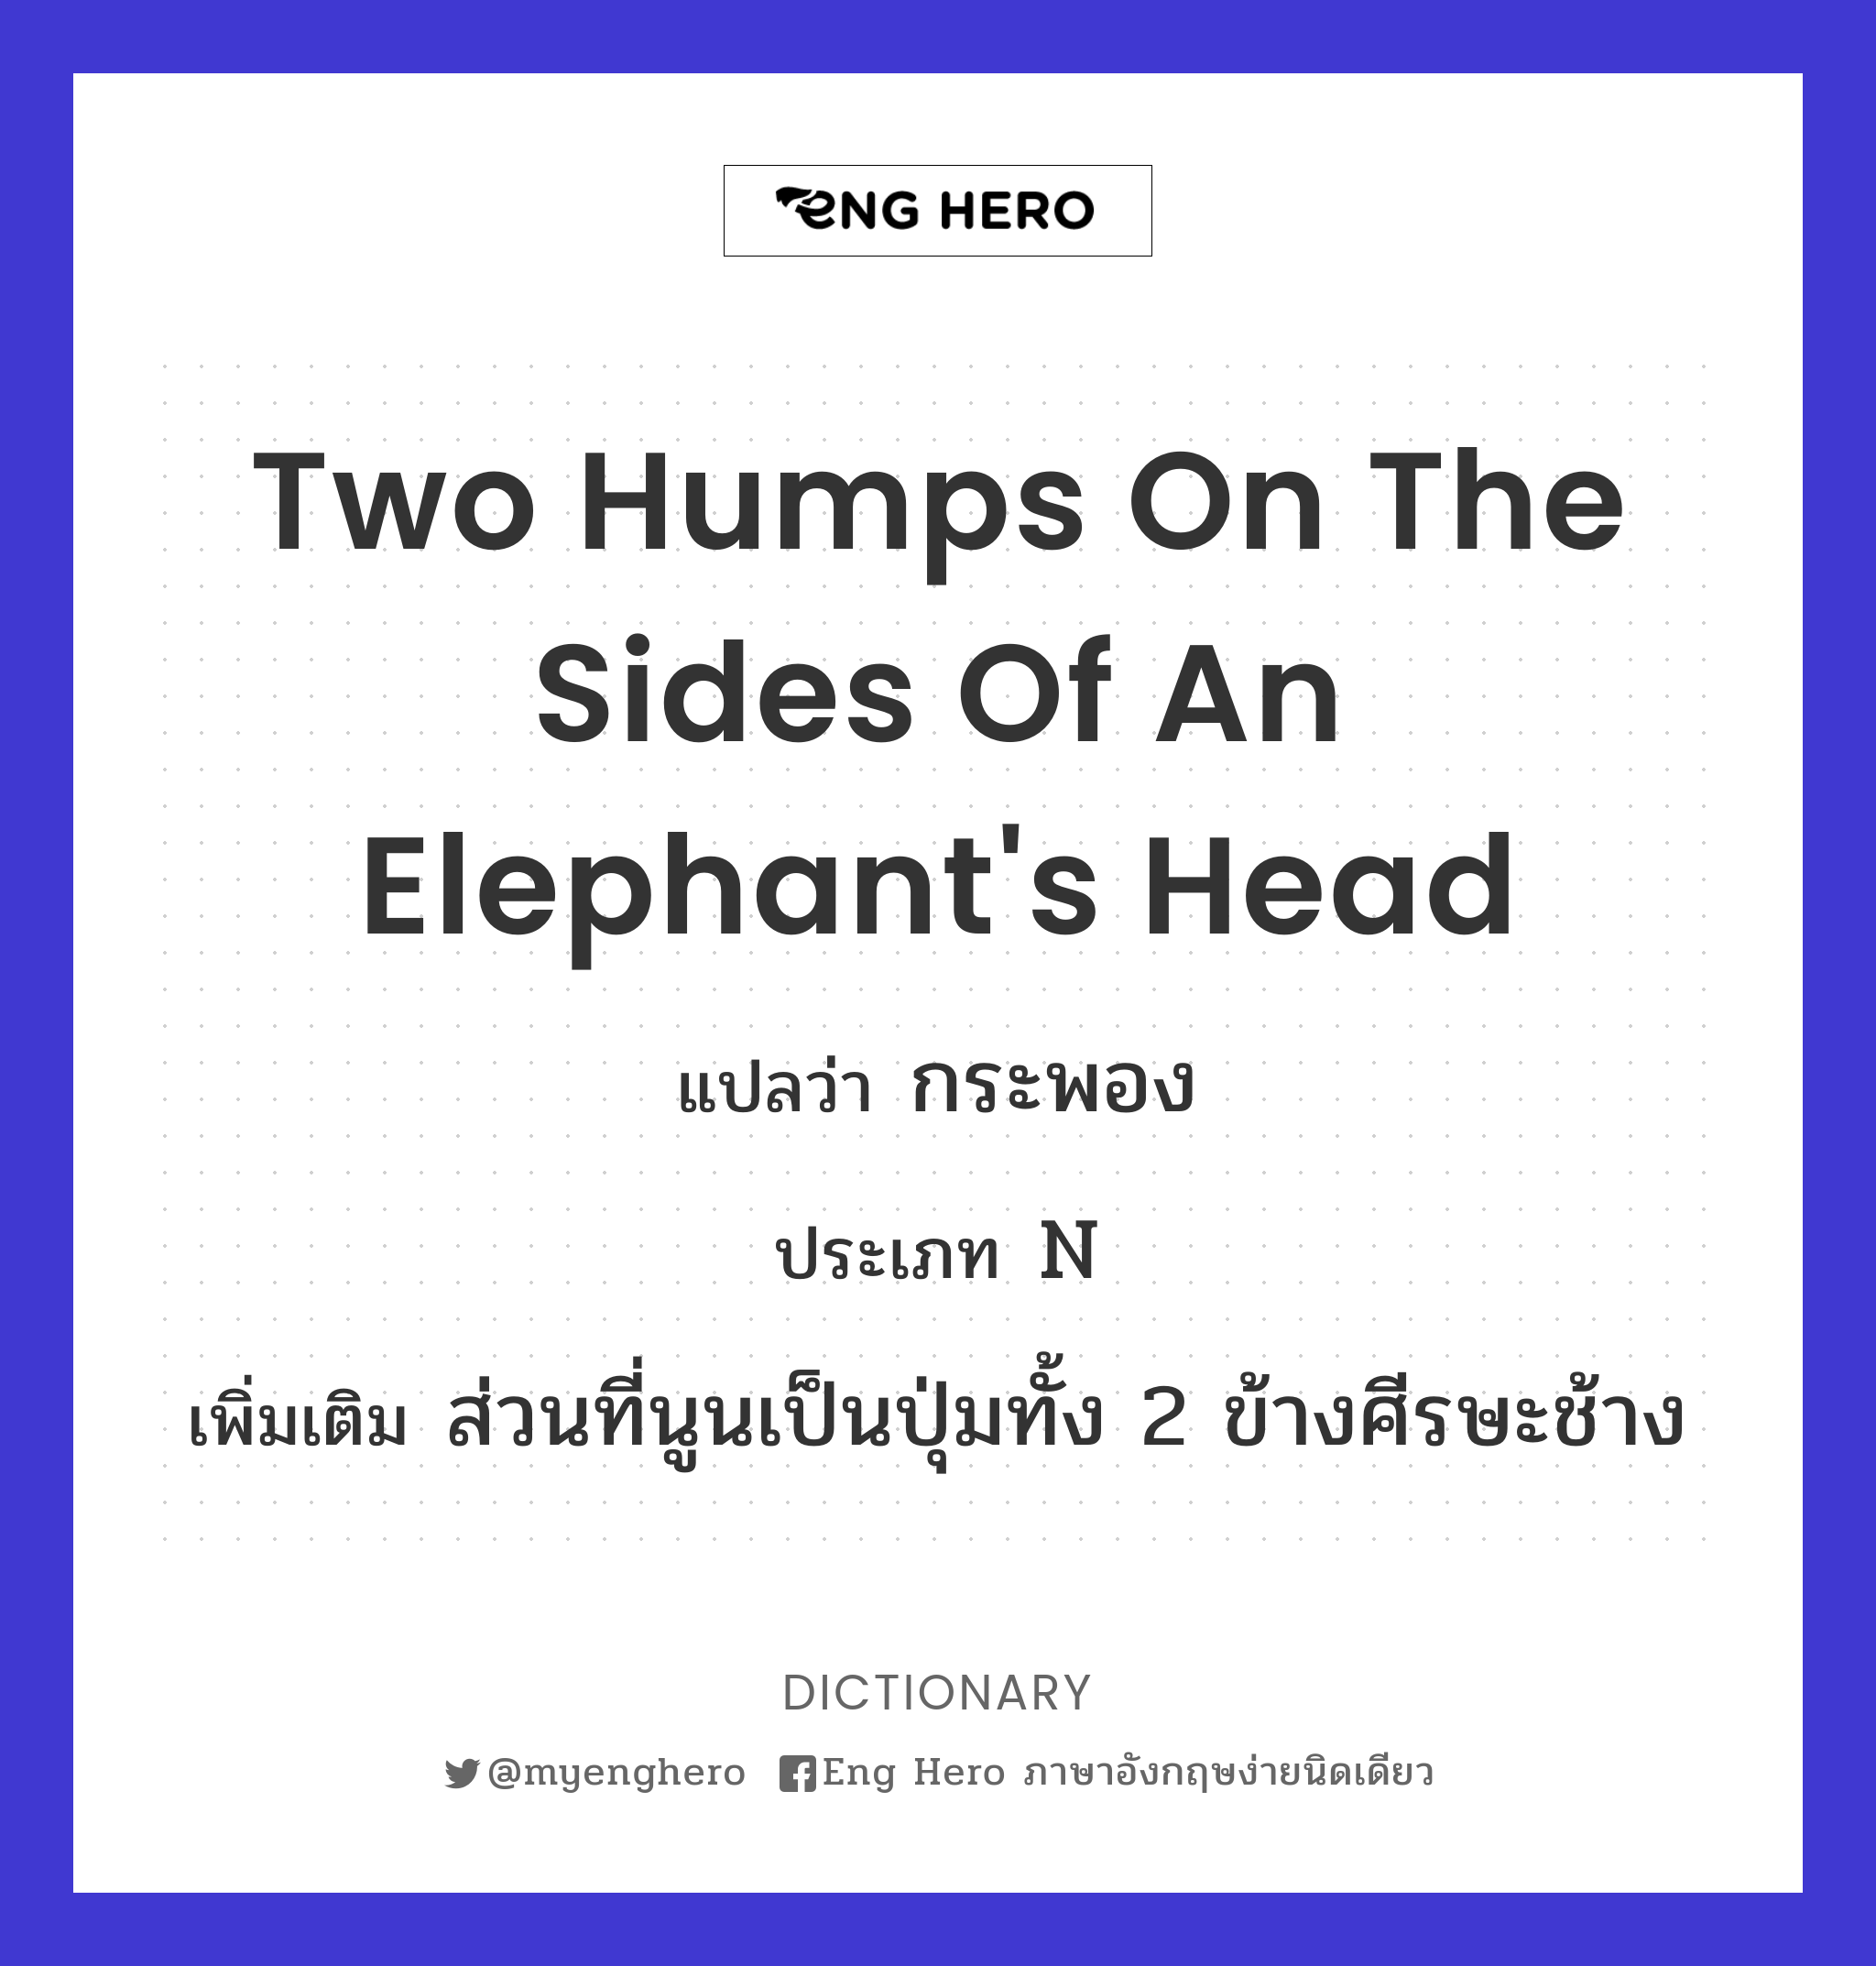 two humps on the sides of an elephant's head